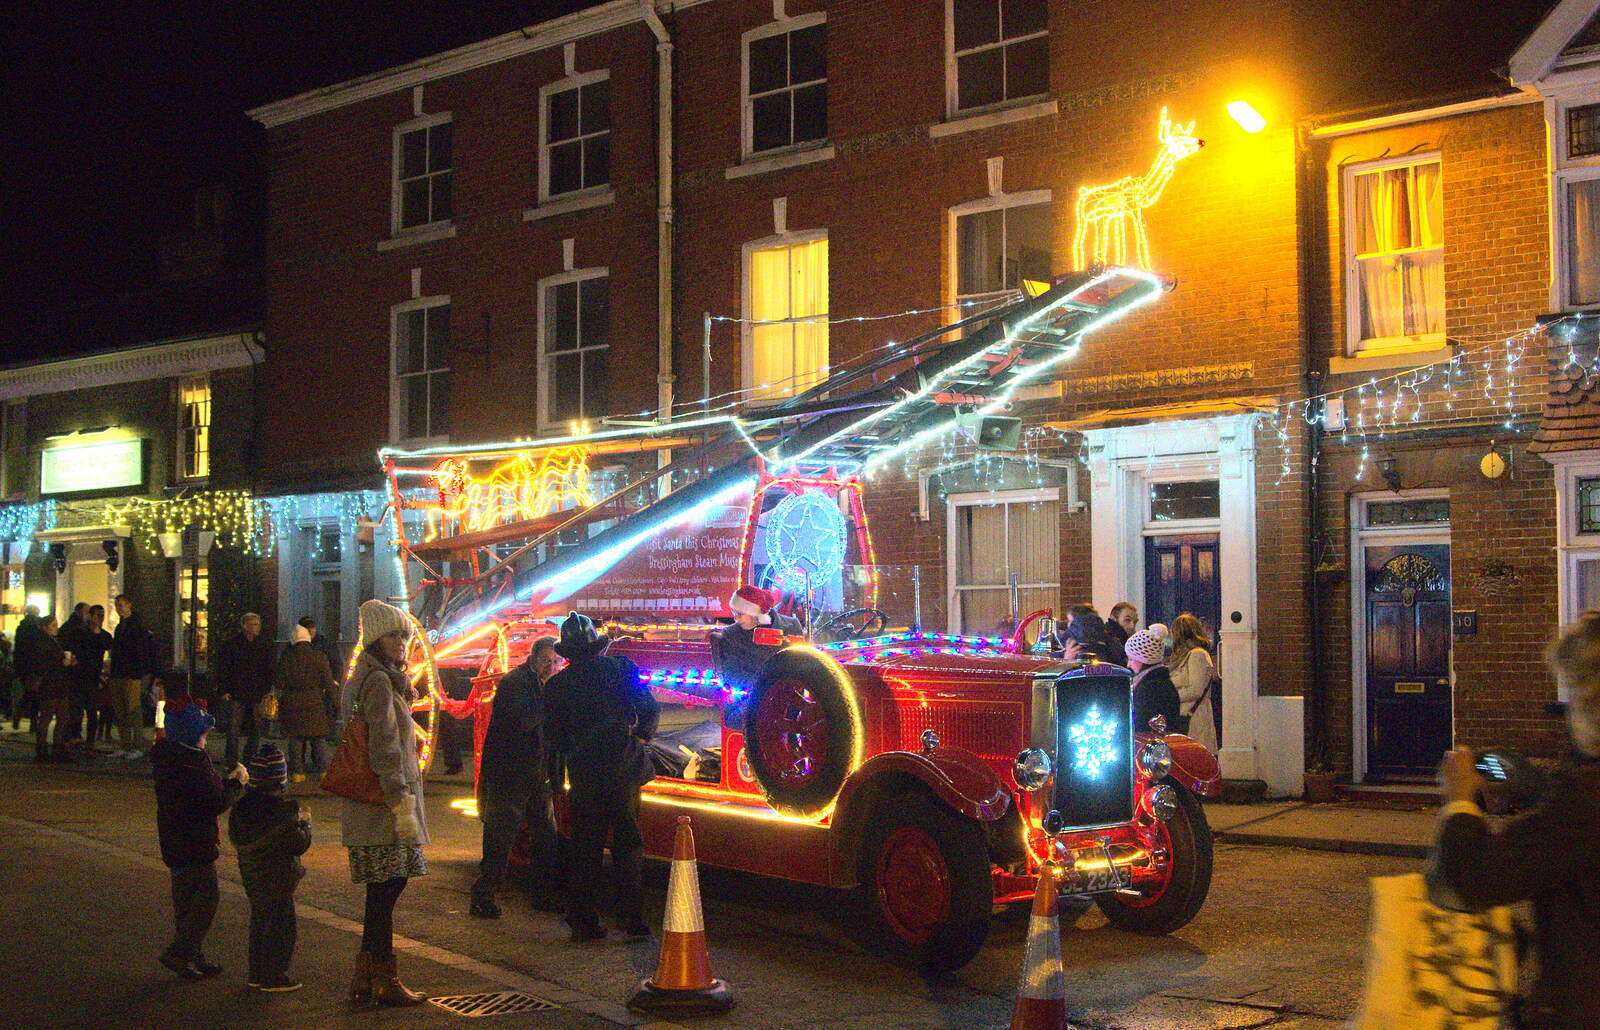 A vintage fire engine in Eye from The Eye Christmas Lights, and a Trip to Norwich, Norfolk - 4th December 2015